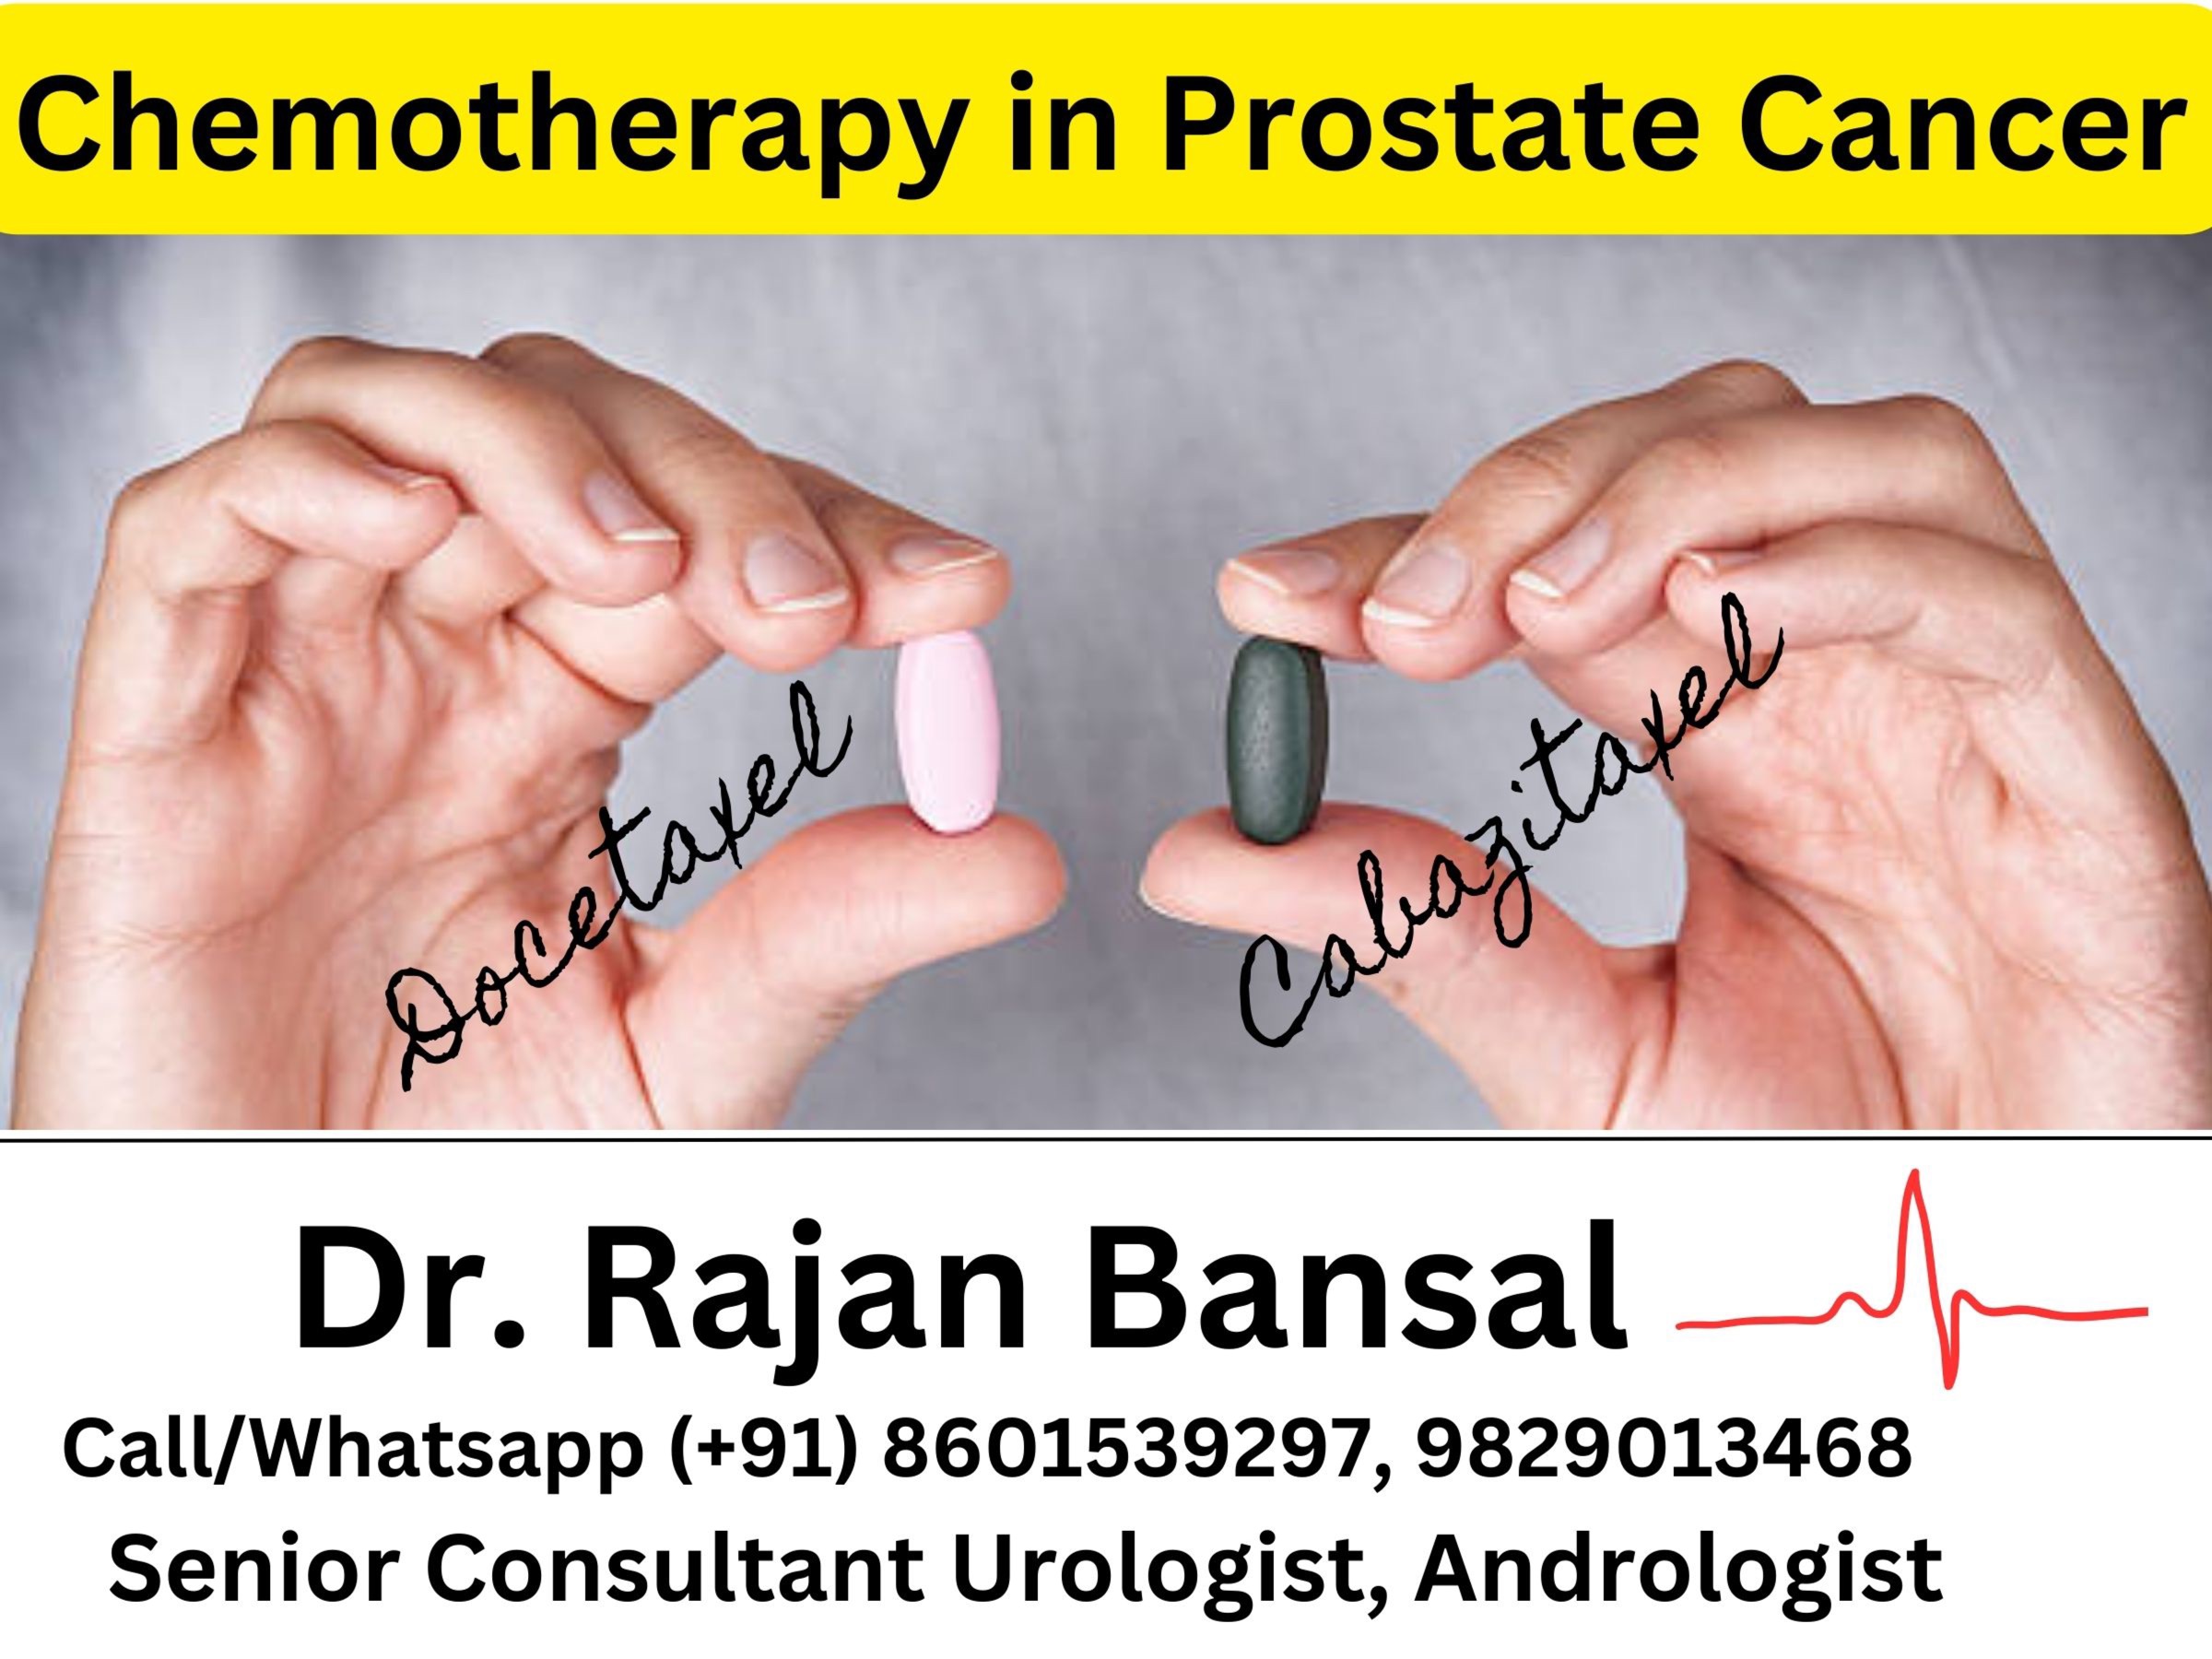 Chemotherapy-in-Prostate-Cancer-A-Comprehensive-Guide-to-Docetaxel-and-Cabazitaxel-Dr-Rajan-Bansal